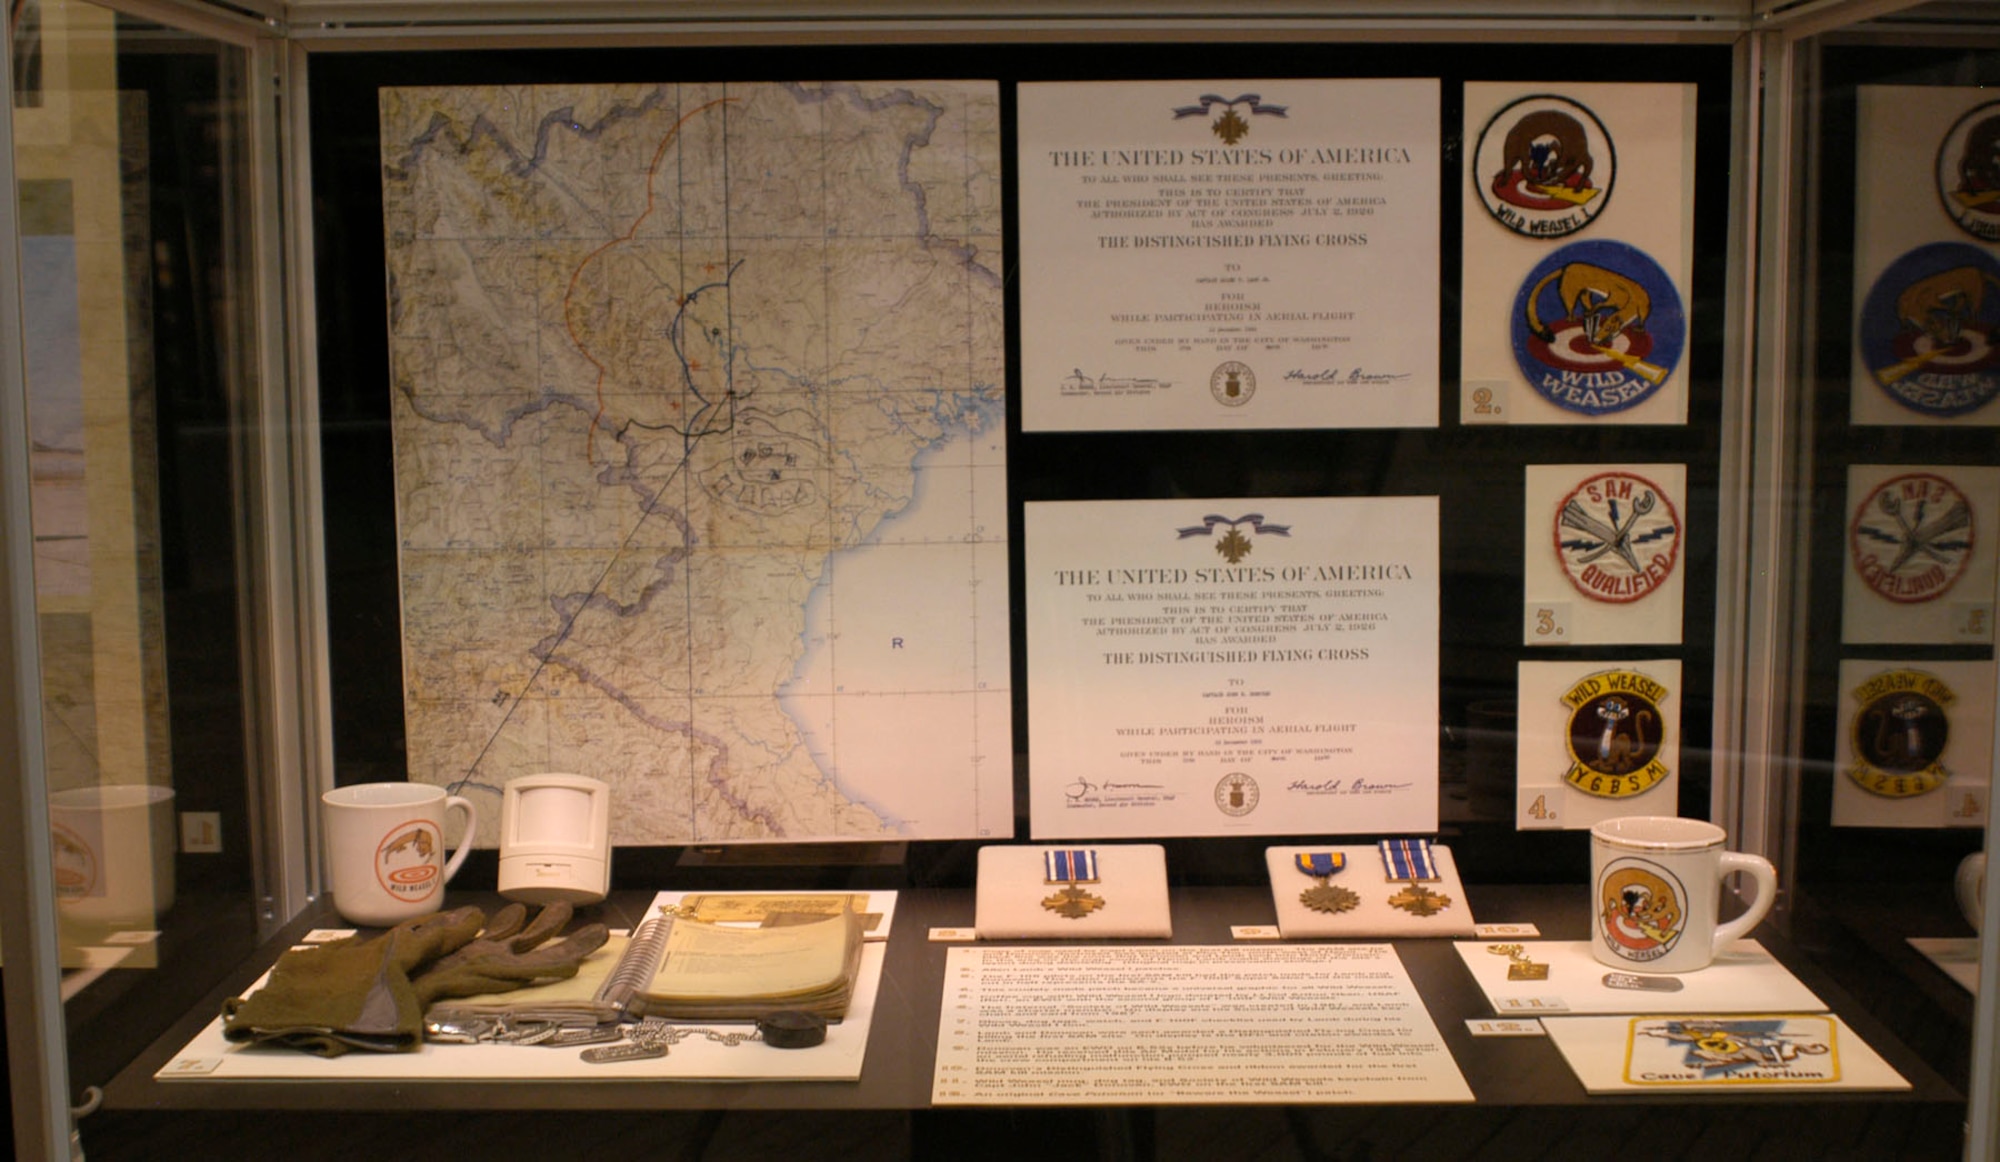 DAYTON, Ohio - In this photo: Map used by Capt. Lamb on the first kill mission. The SAM site he and Donovan destroyed was located at Phy Tho, northwest of Hanoi. The black line was the route that Donovan and Lamb took into North Vietnam. In the area on the map south of Hanoi, Lamb made drawings of the site's layout during debriefing. Gloves, dog tags, watch and F-100F checklist used by Lamb during his Wild Weasel I tour. Lamb and Donovan were each awarded a Distinguished Flying Cross for killing the first SAM site. On display is the DFC and citation awarded to Lamb. The F-105 pilots on the first SAM kill had this patch made for Lamb and Donovan for killing the first SAM site. This saber represents to F-100F Super Sabre and the missile cut in half represents to SA-2. Allen Lamb's Wild Weasel I patches. This crudely made patch became a universal graphic for all Wild Weasels. An original Cave Putorium (or "Beware the Weasel") patch. The fraternal "Society of Wild Weasels" was created in 1967, and Lamb was a charter member. On display are his Society of Wild Weasels key chain and card from 1967. Coffee cup with Wild Weasel I logo donated by Lt. Col. Arthur Oken, USAF (ret.), an EWO with the second group of F-100F Wild Weasels. Donovan was an EWO on B-52s before he volunteered for the Wild Weasels mission. He received this air medal for his actions in February 1965 when an aerial refueling malfunctions pumped nearly 3,000 pounds into the fuel into the crew compartment on his B-52. Wild Weasel mug, dog tag and Society of WIld Weasels keychain from Capt. John "Jack" Donovan, EWO on the first SAM kill. (U.S. Air Force photo)